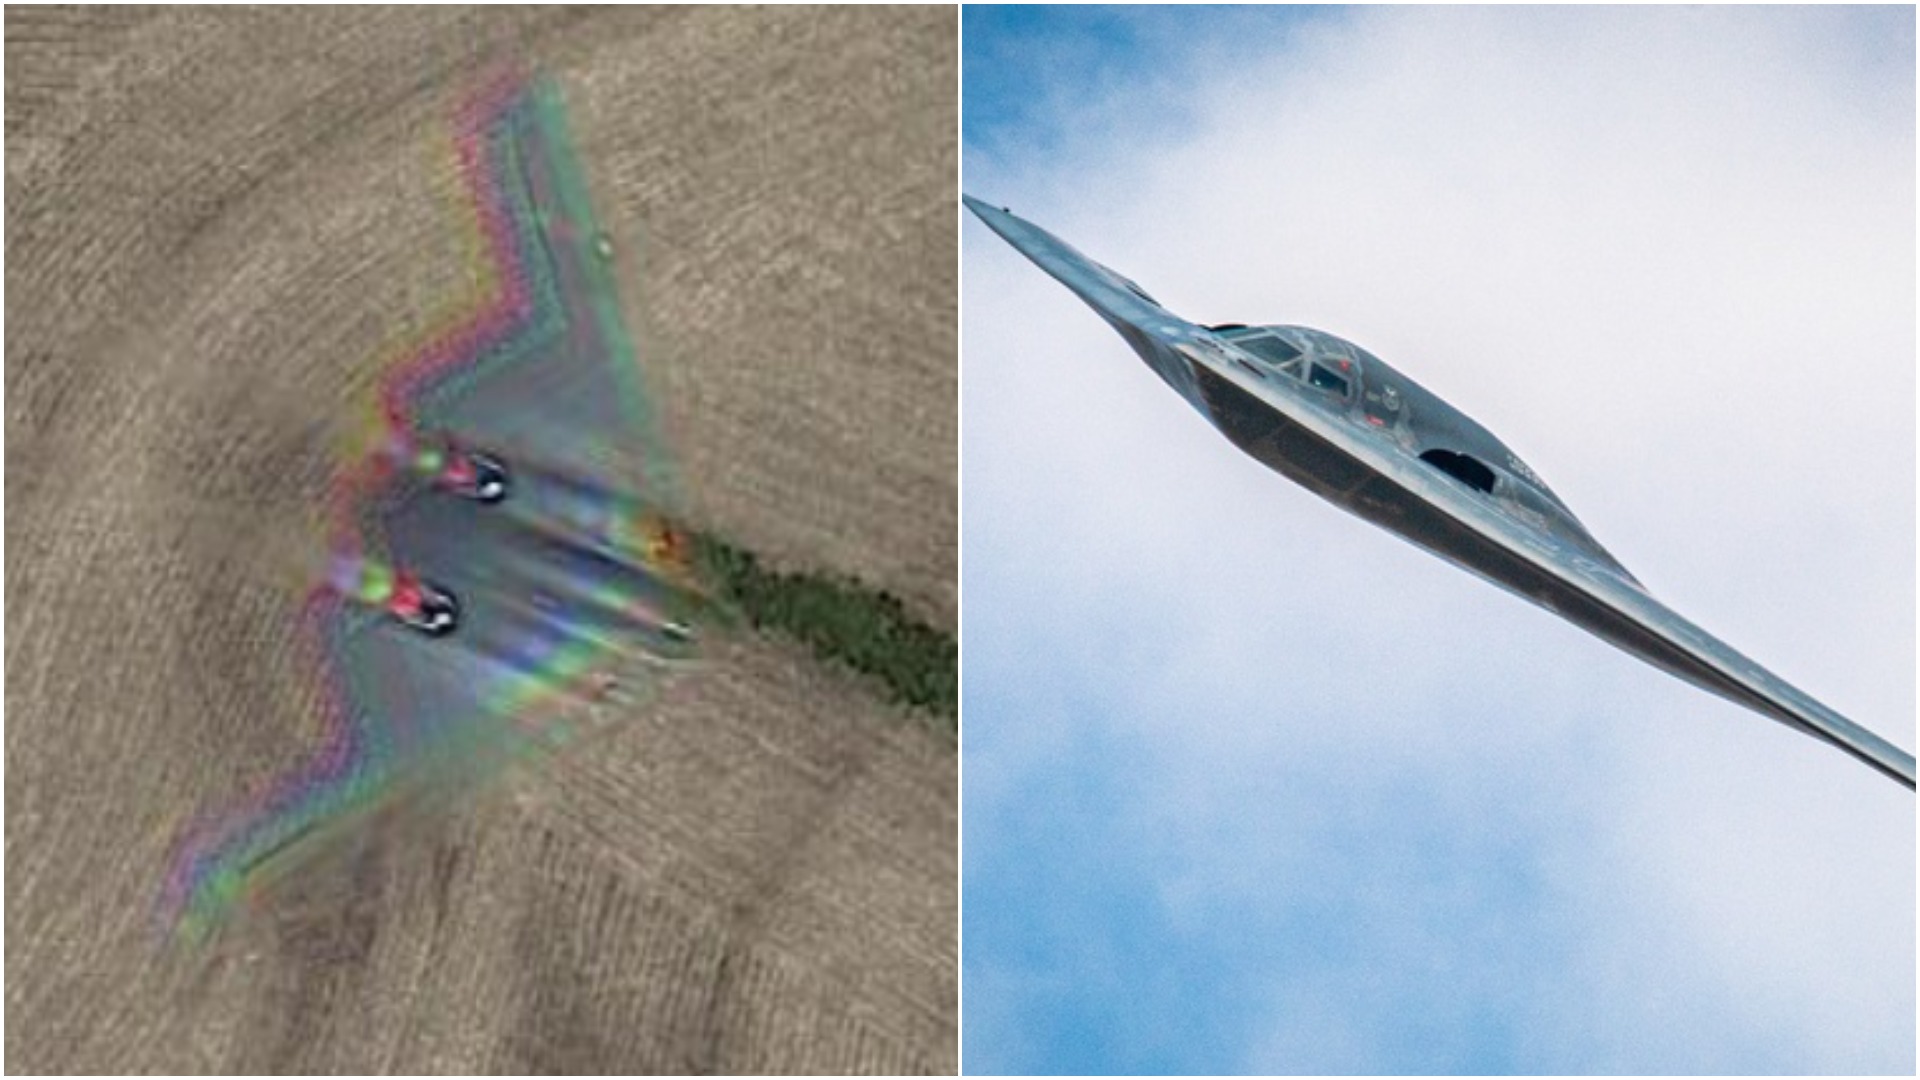 The cutting-edge Air Force B-2 Spirit bomber was captured flying over Missouri, 20 miles north of its home at Whiteman Air Force Base. (Task & Purpose photo illustration)